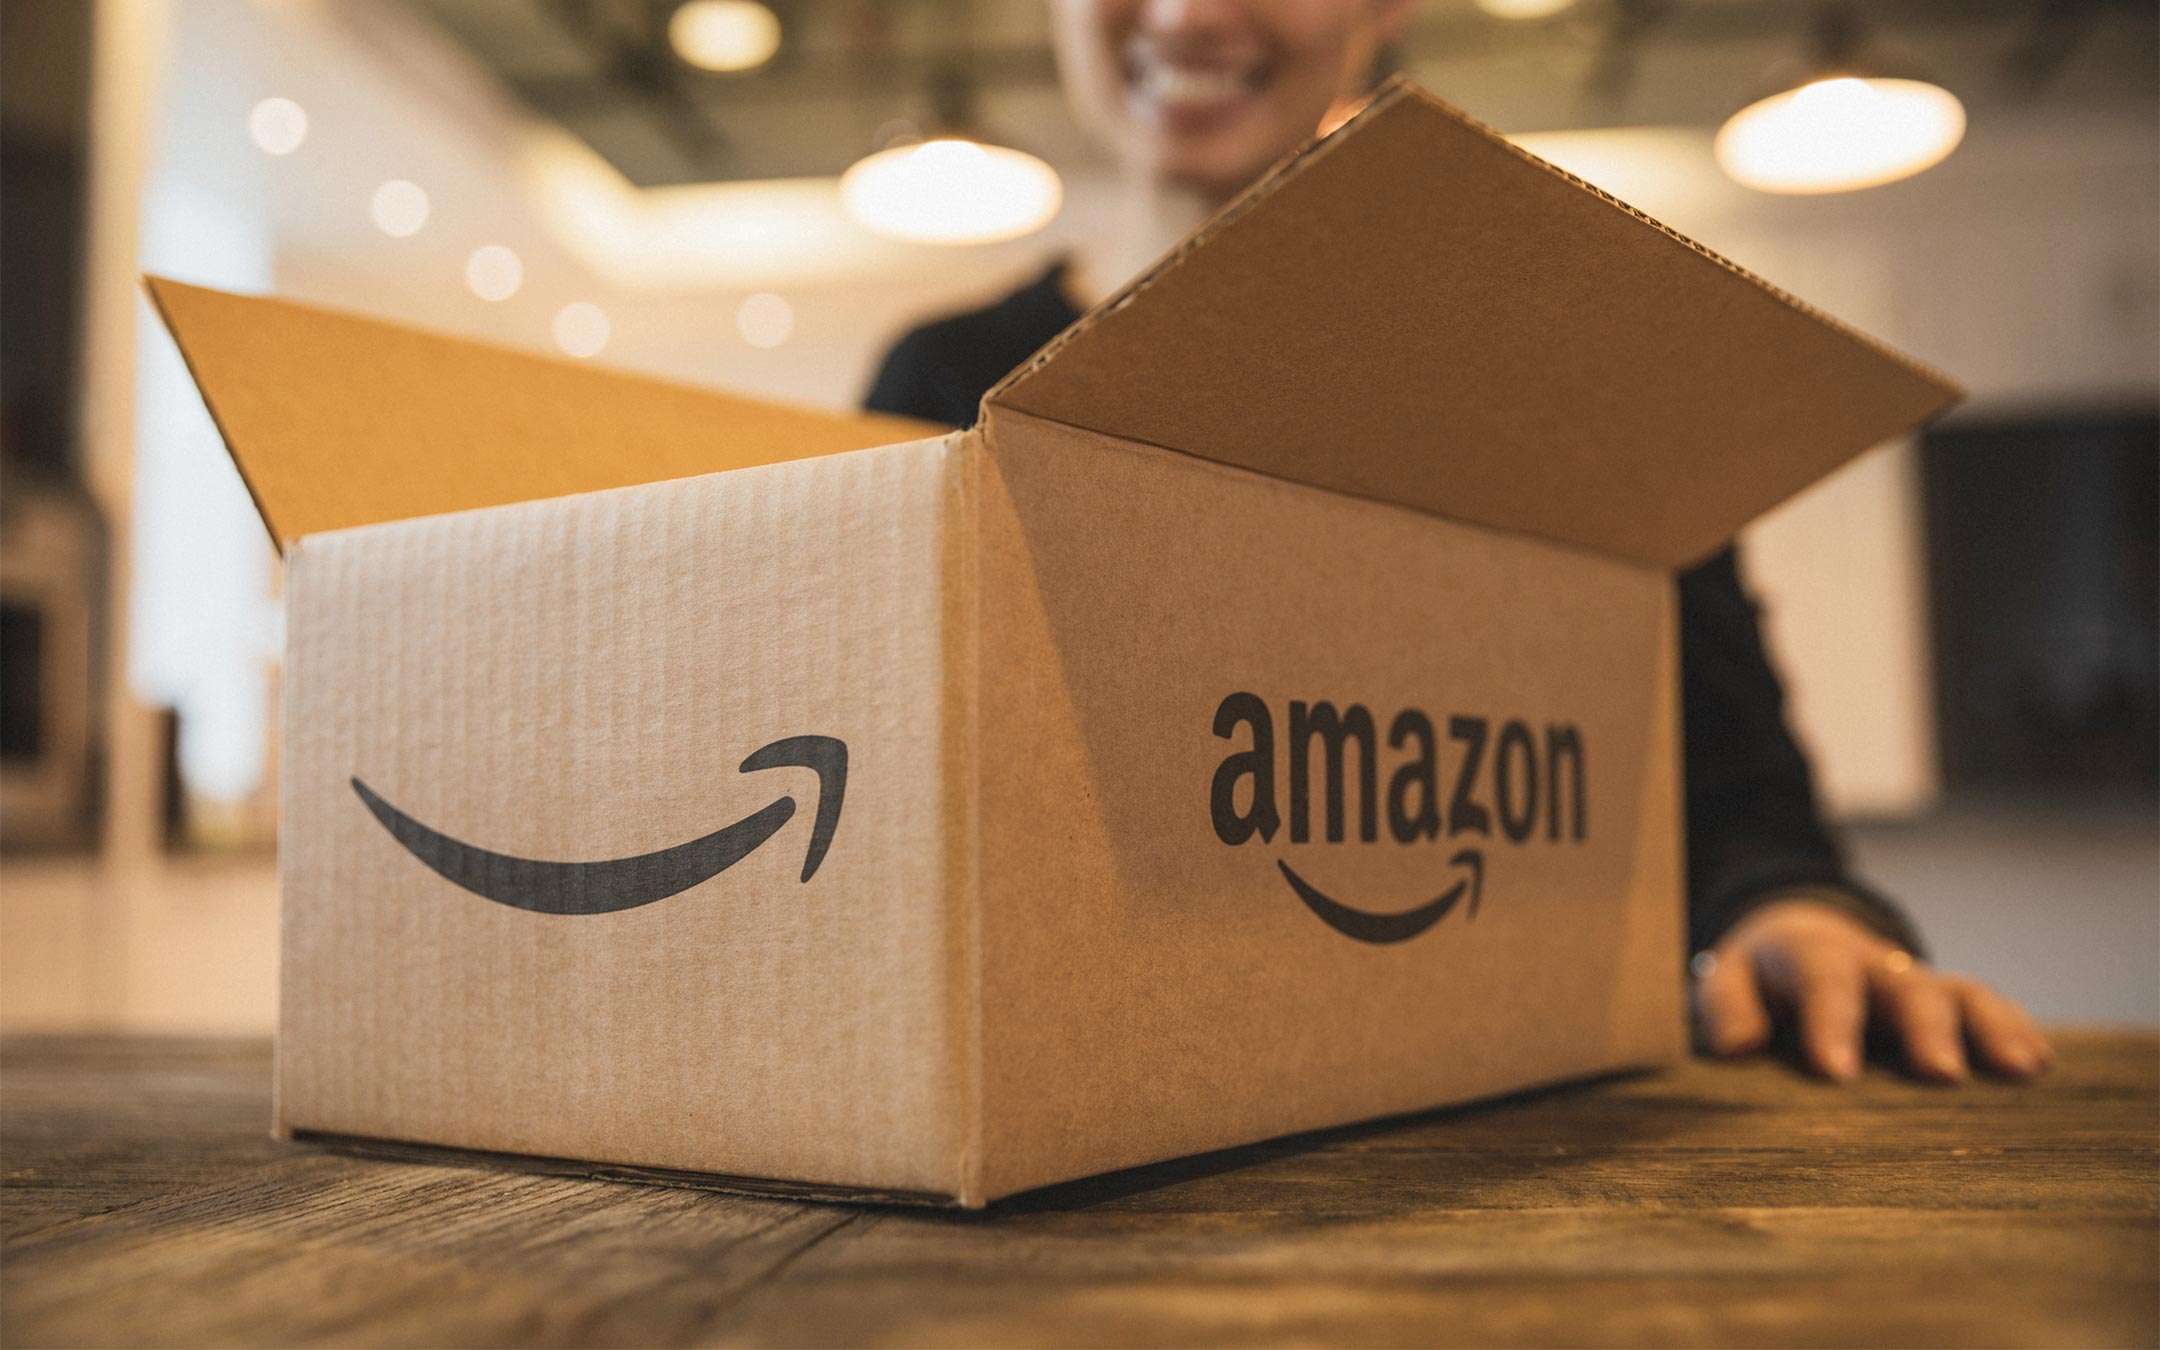 Amazon Prime Day boosted SME sales